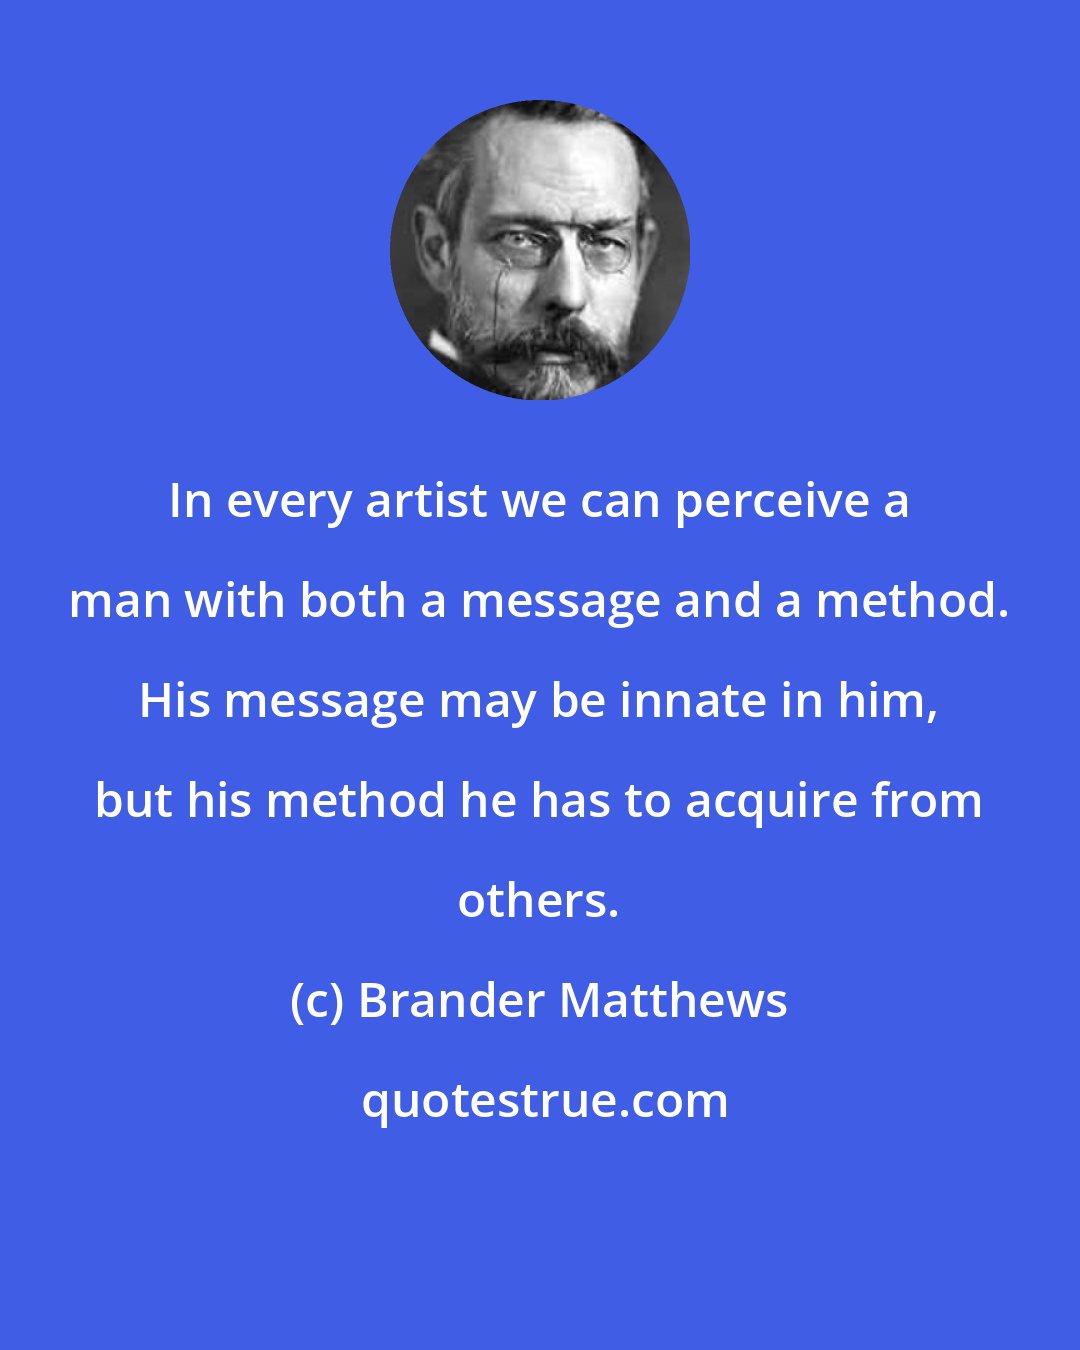 Brander Matthews: In every artist we can perceive a man with both a message and a method. His message may be innate in him, but his method he has to acquire from others.